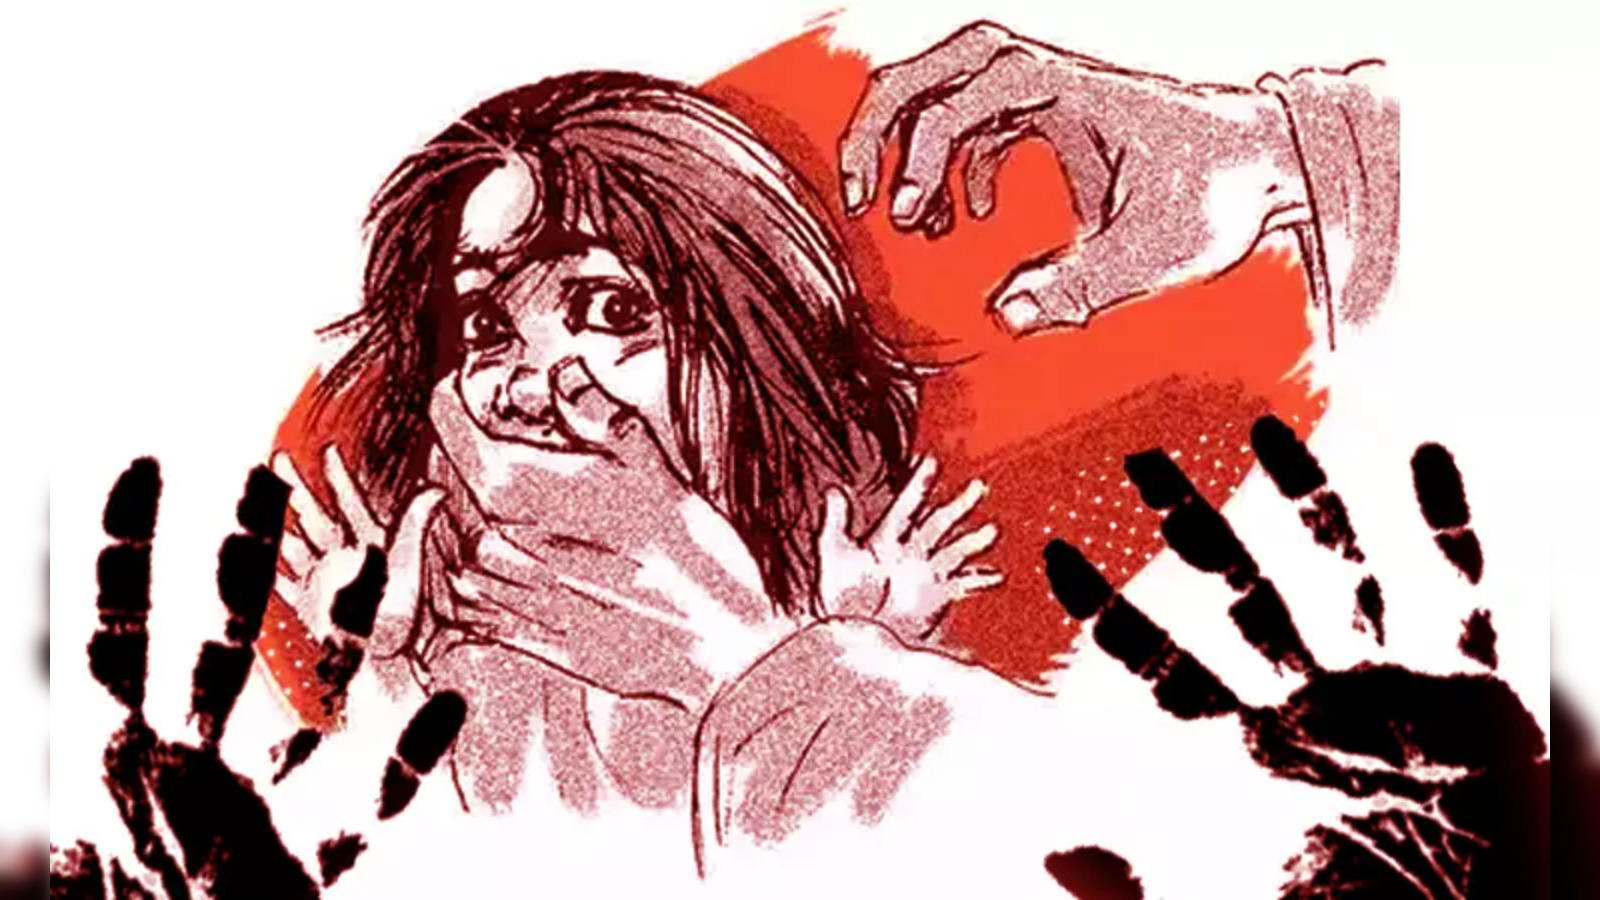 Siliguri: Two arrested for rape & molestation in 2 separate incidents